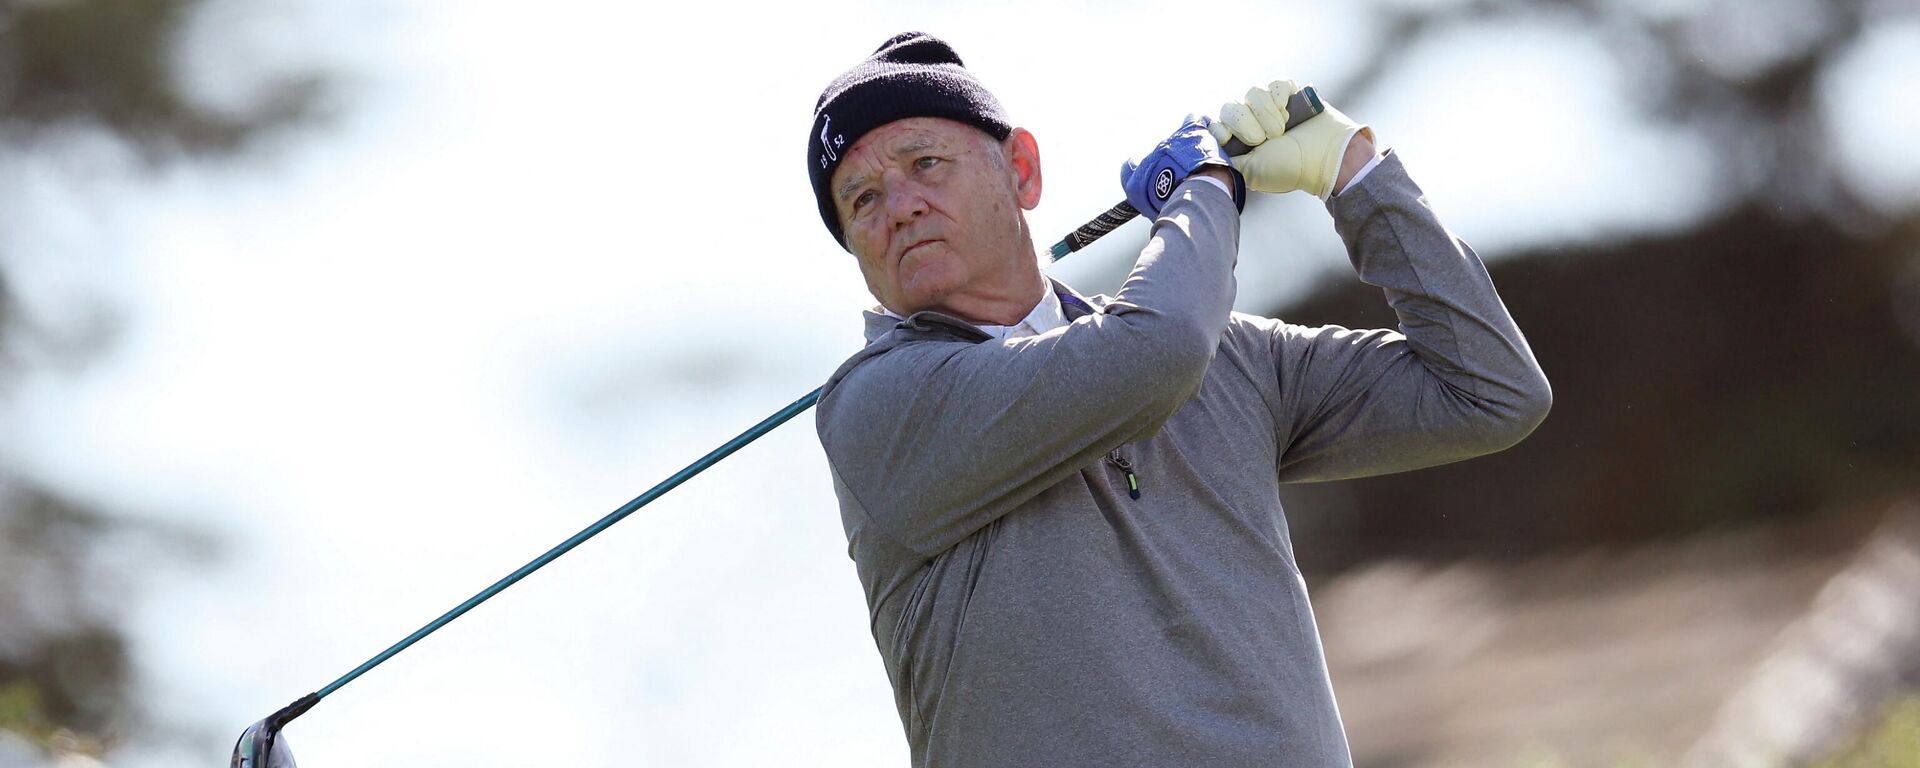 Actor Bill Murray plays his shot from the eighth tee during the first round of the AT&T Pebble Beach Pro-Am at Monterey Peninsula Country Club on February 03, 2022 in Pebble Beach, California - Sputnik International, 1920, 06.02.2022